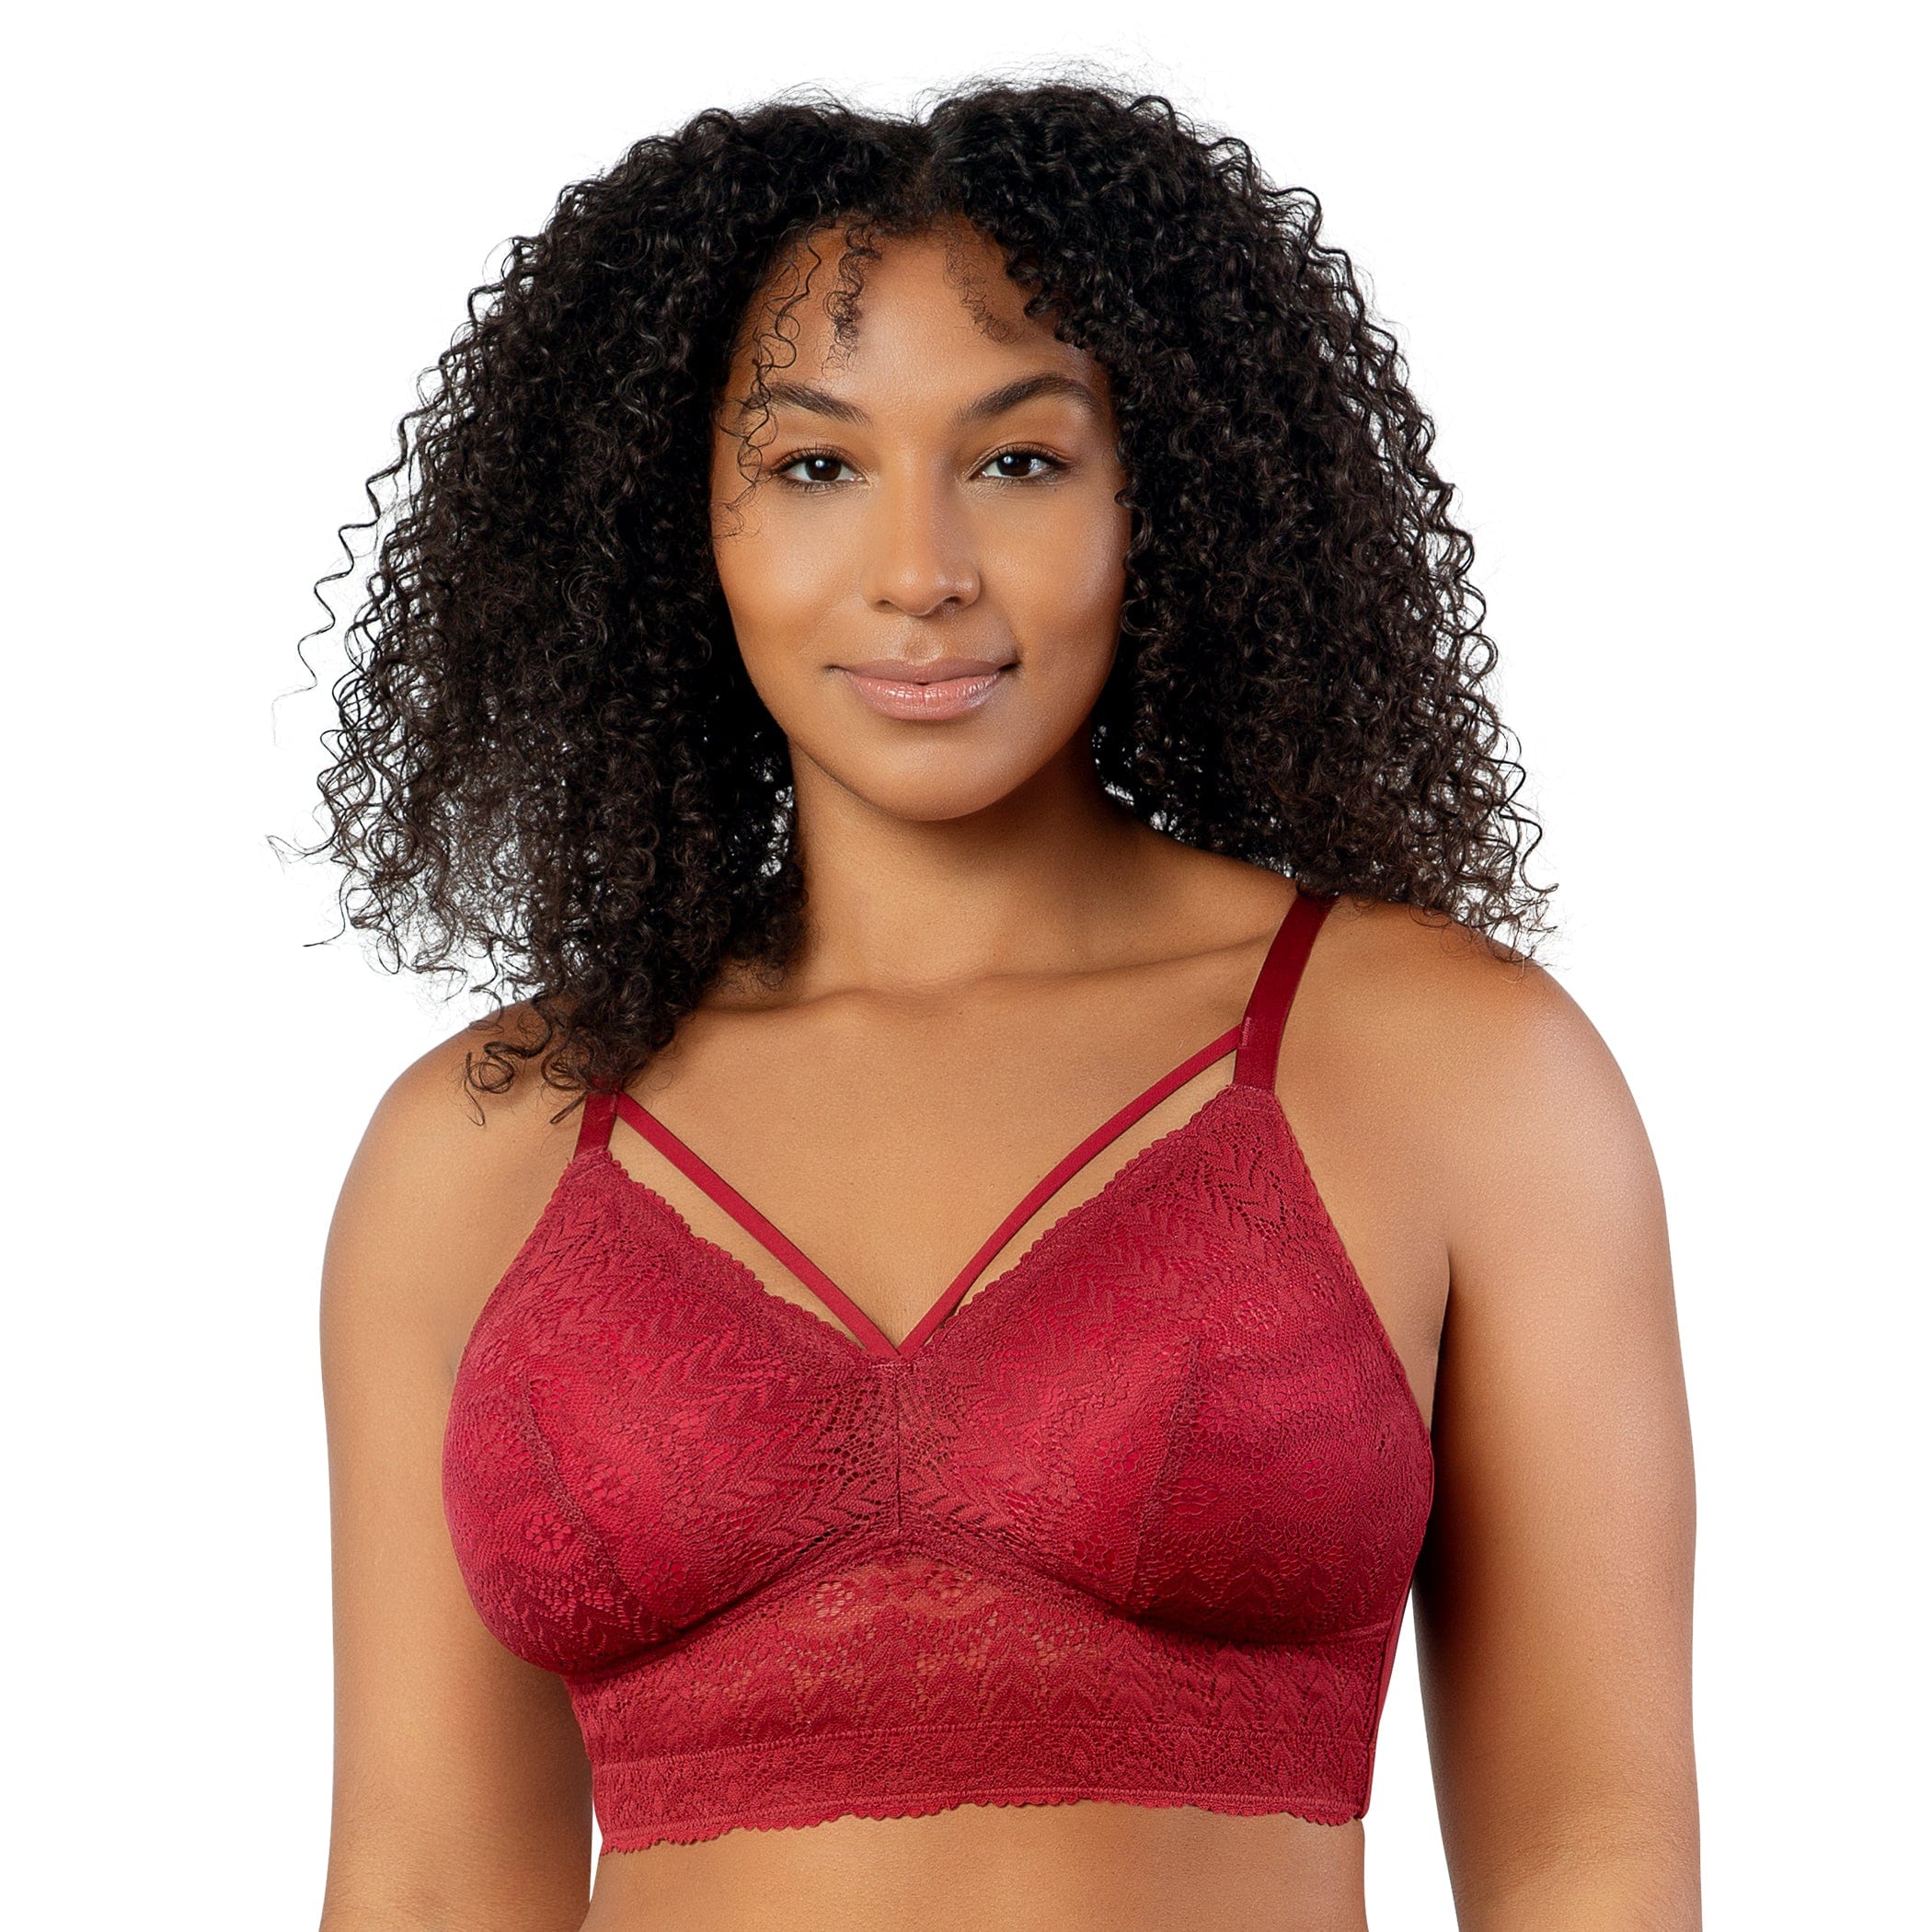 Nursing Lace Bralette - Candy red